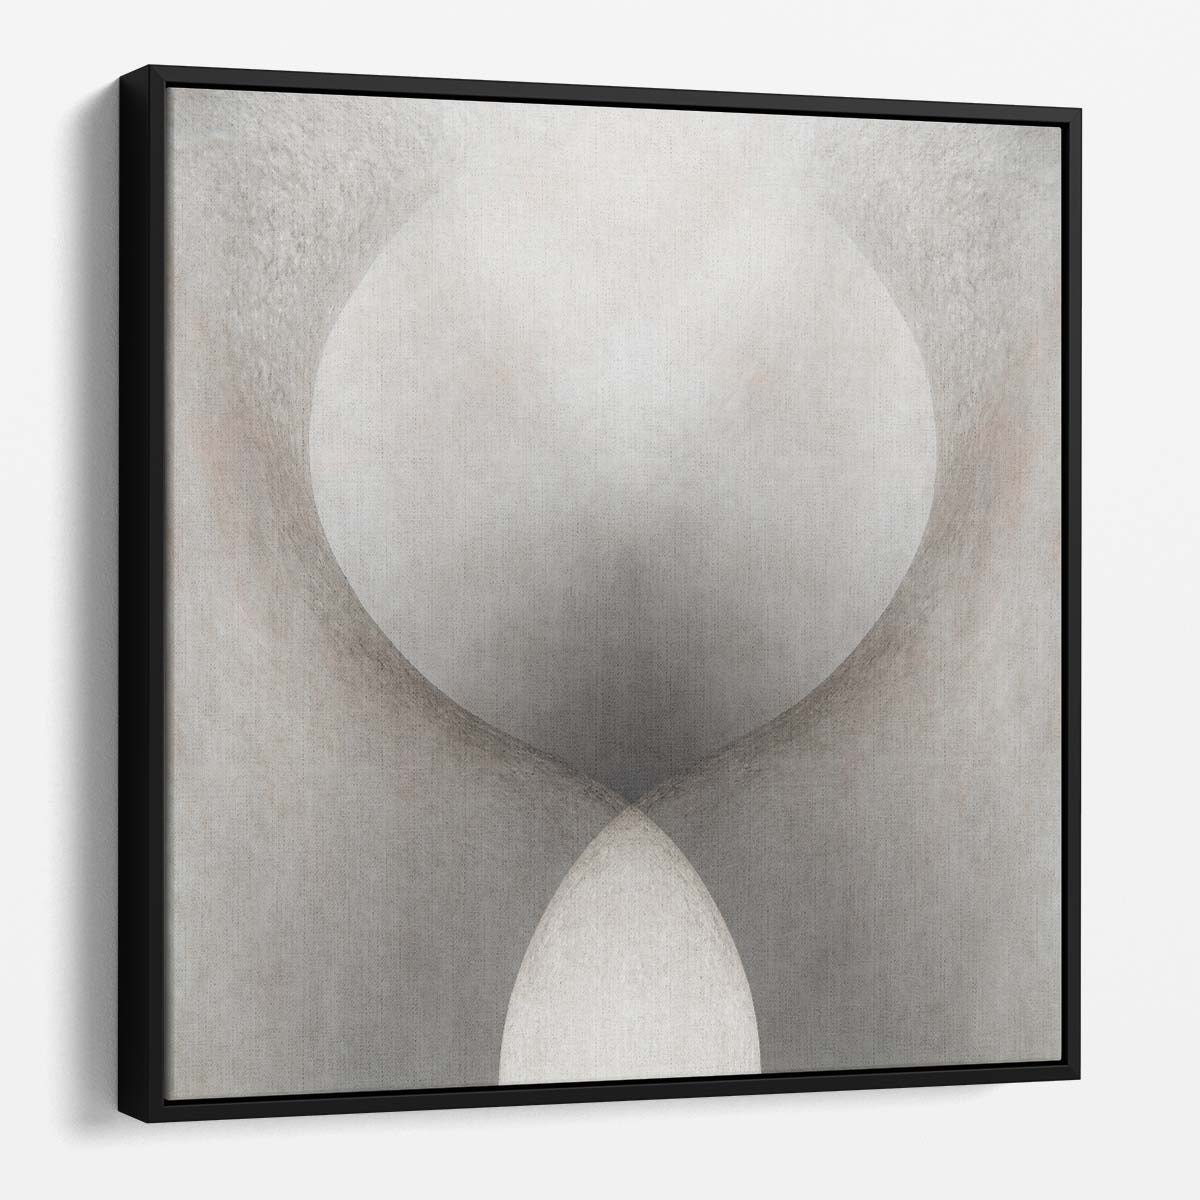 Symmetric Shapes Abstract Geometric Suprematism Photography Wall Art by Luxuriance Designs. Made in USA.